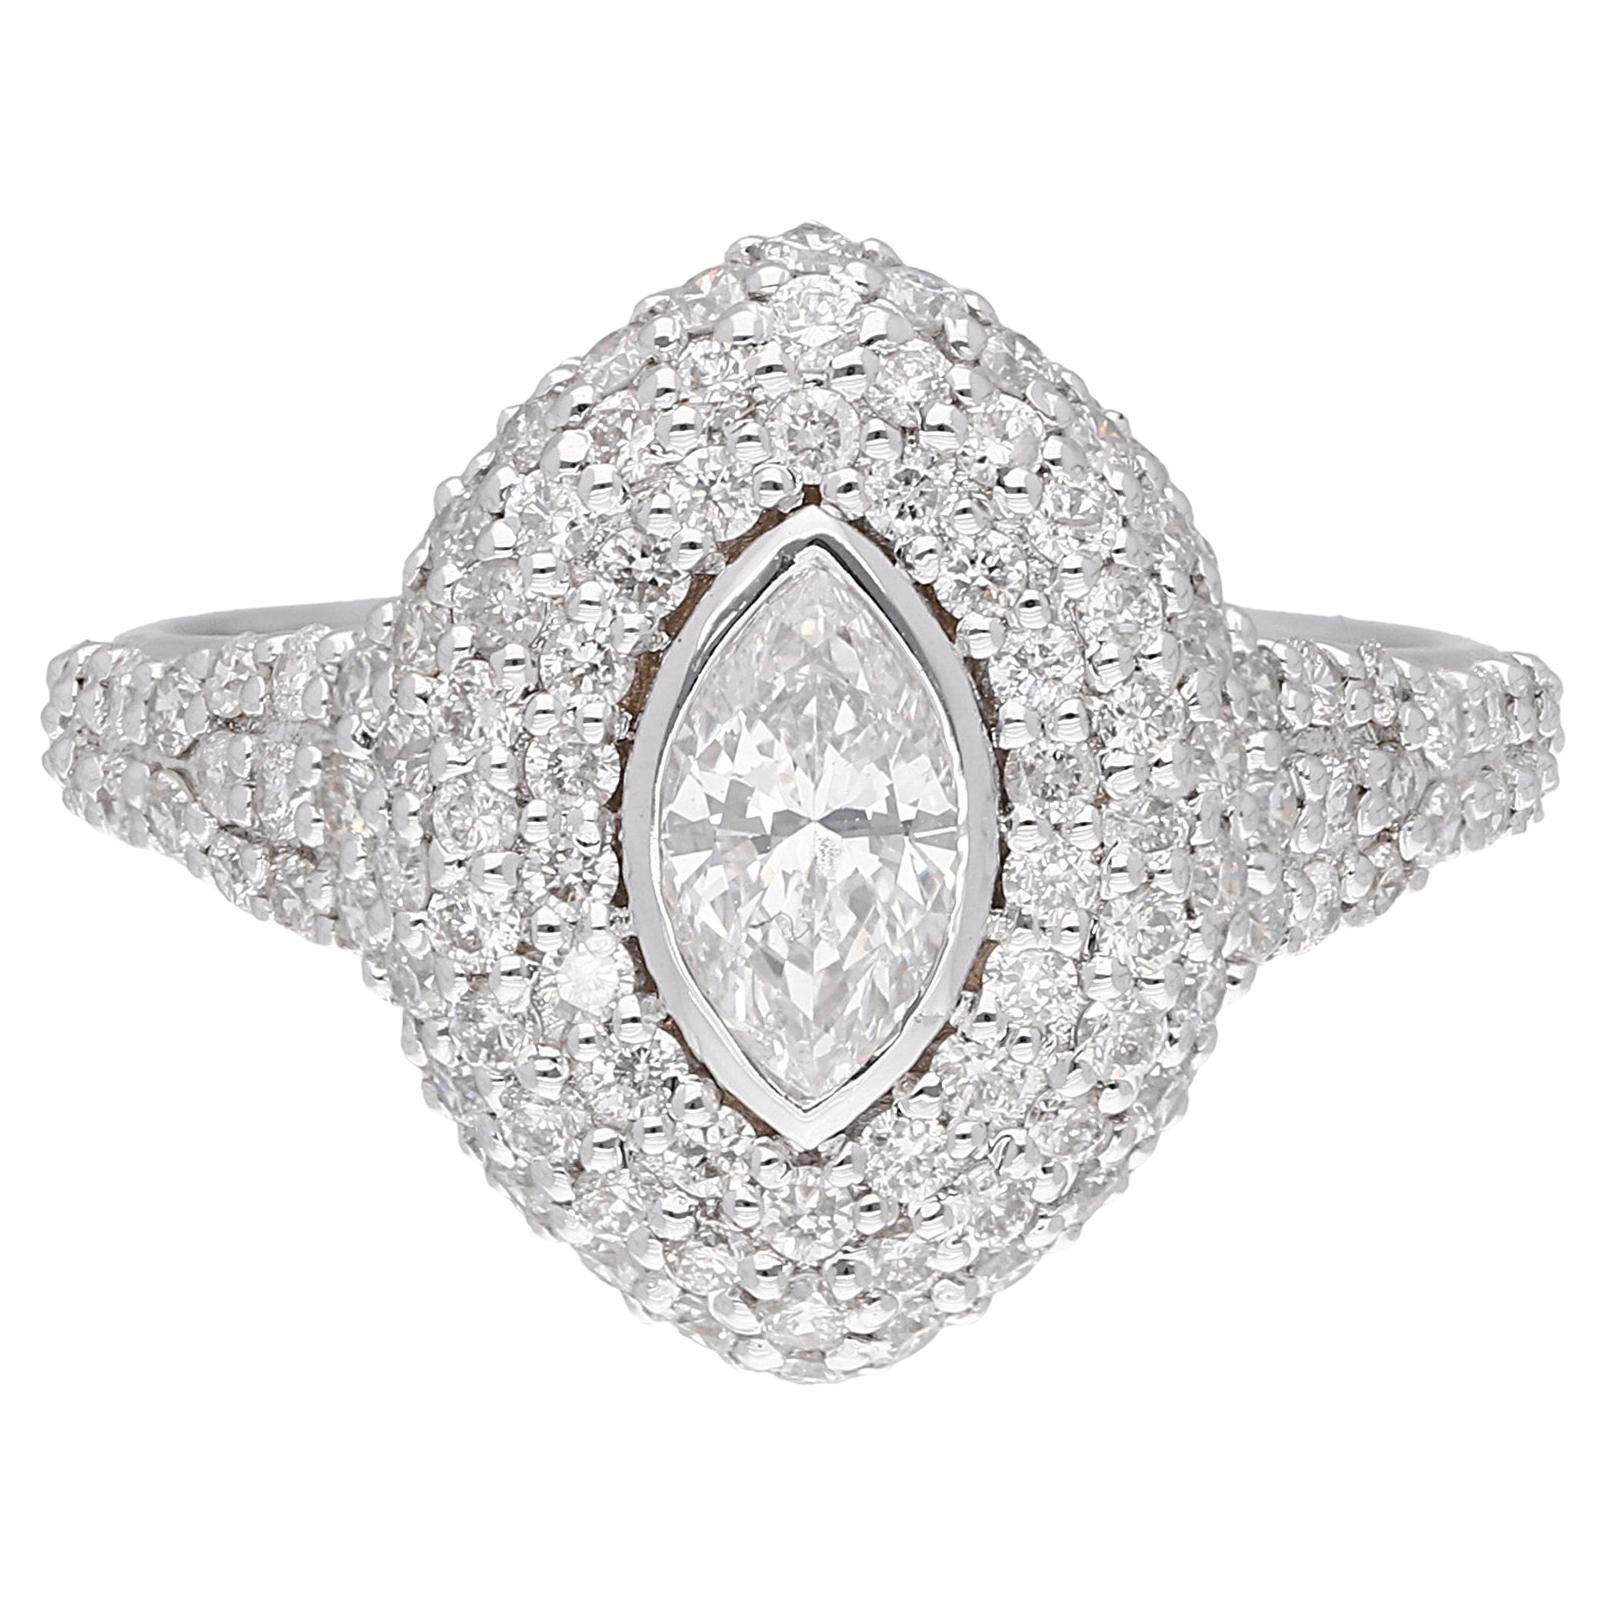 1.73 Carat SI Clarity HI Color Marquise Round Diamond Ring 18 Karat White Gold For Sale